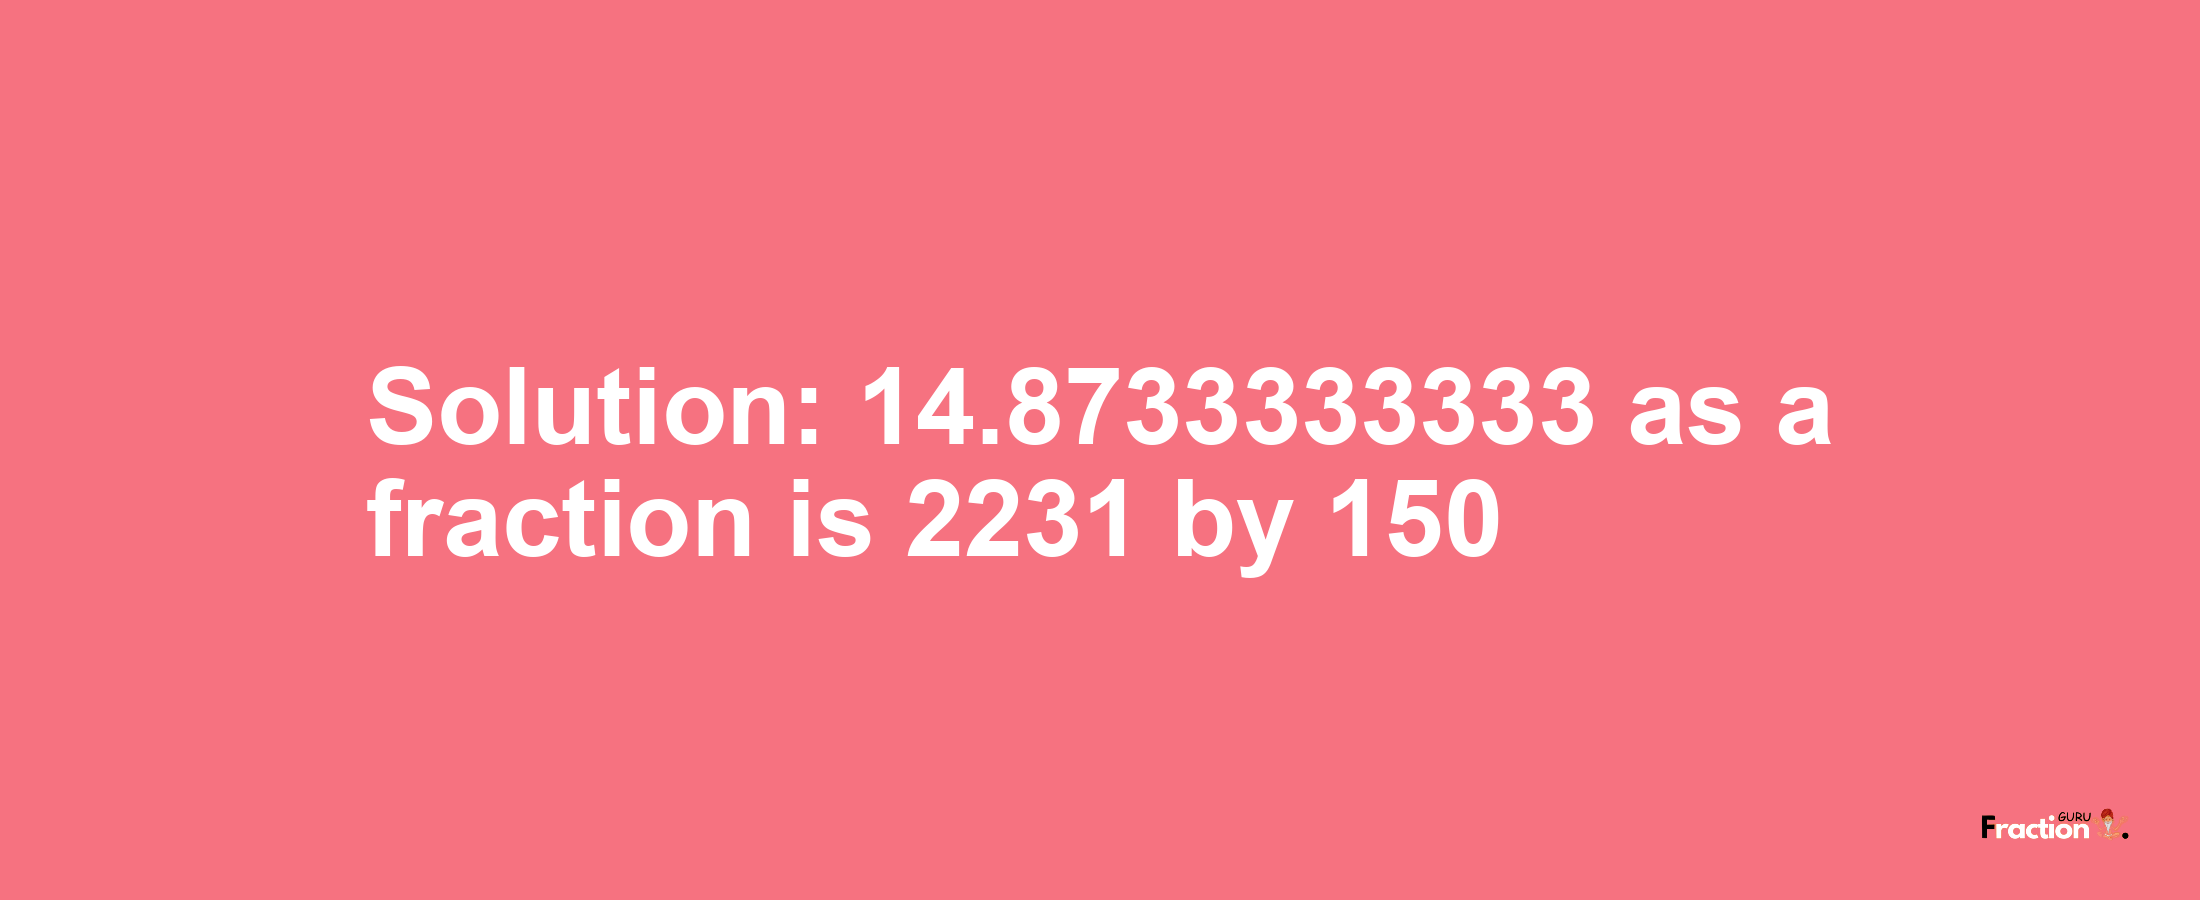 Solution:14.8733333333 as a fraction is 2231/150